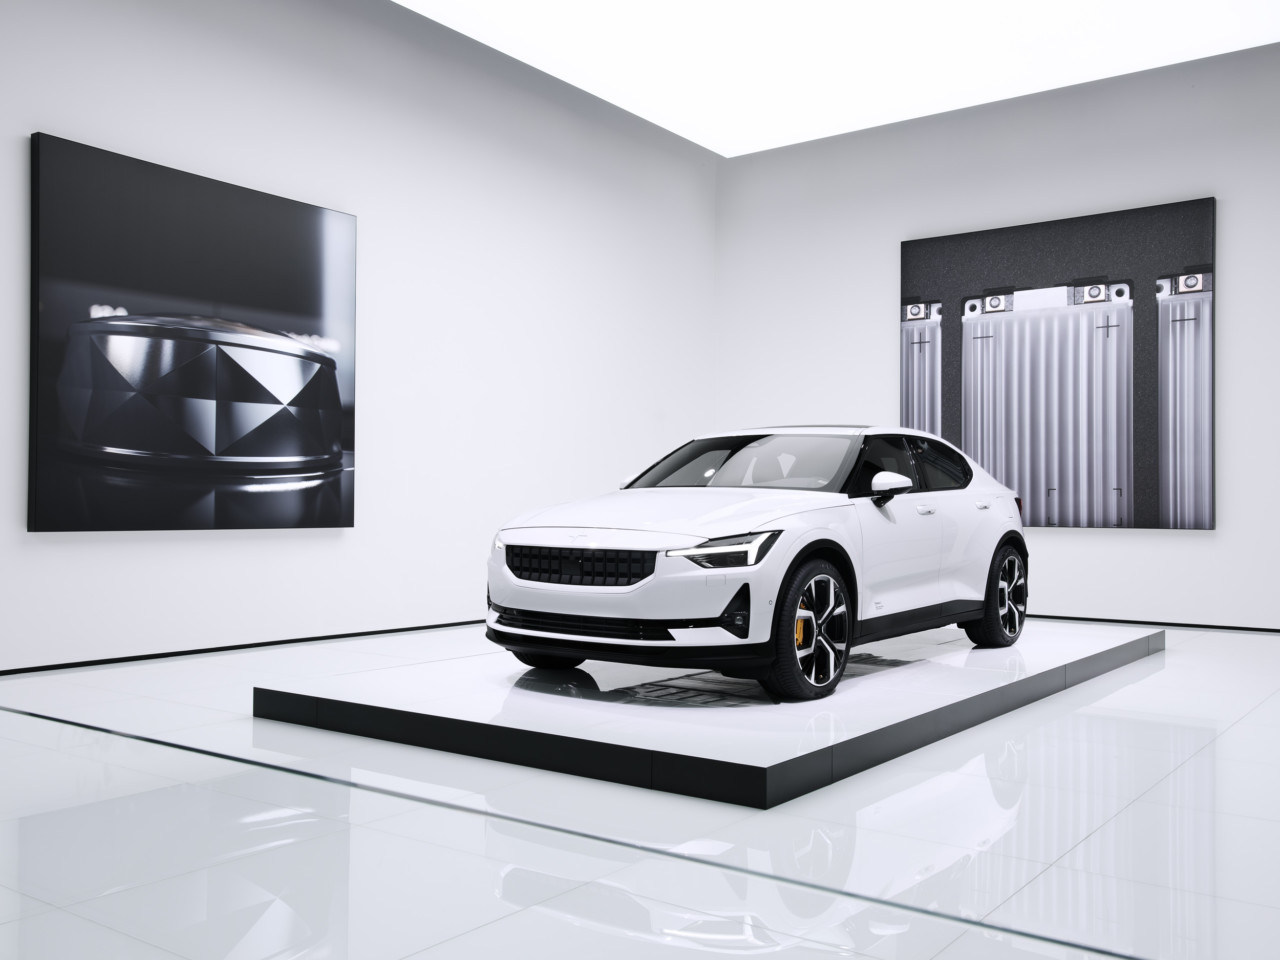 Architecture and Automotive Come Together at Polestar 2 Debut